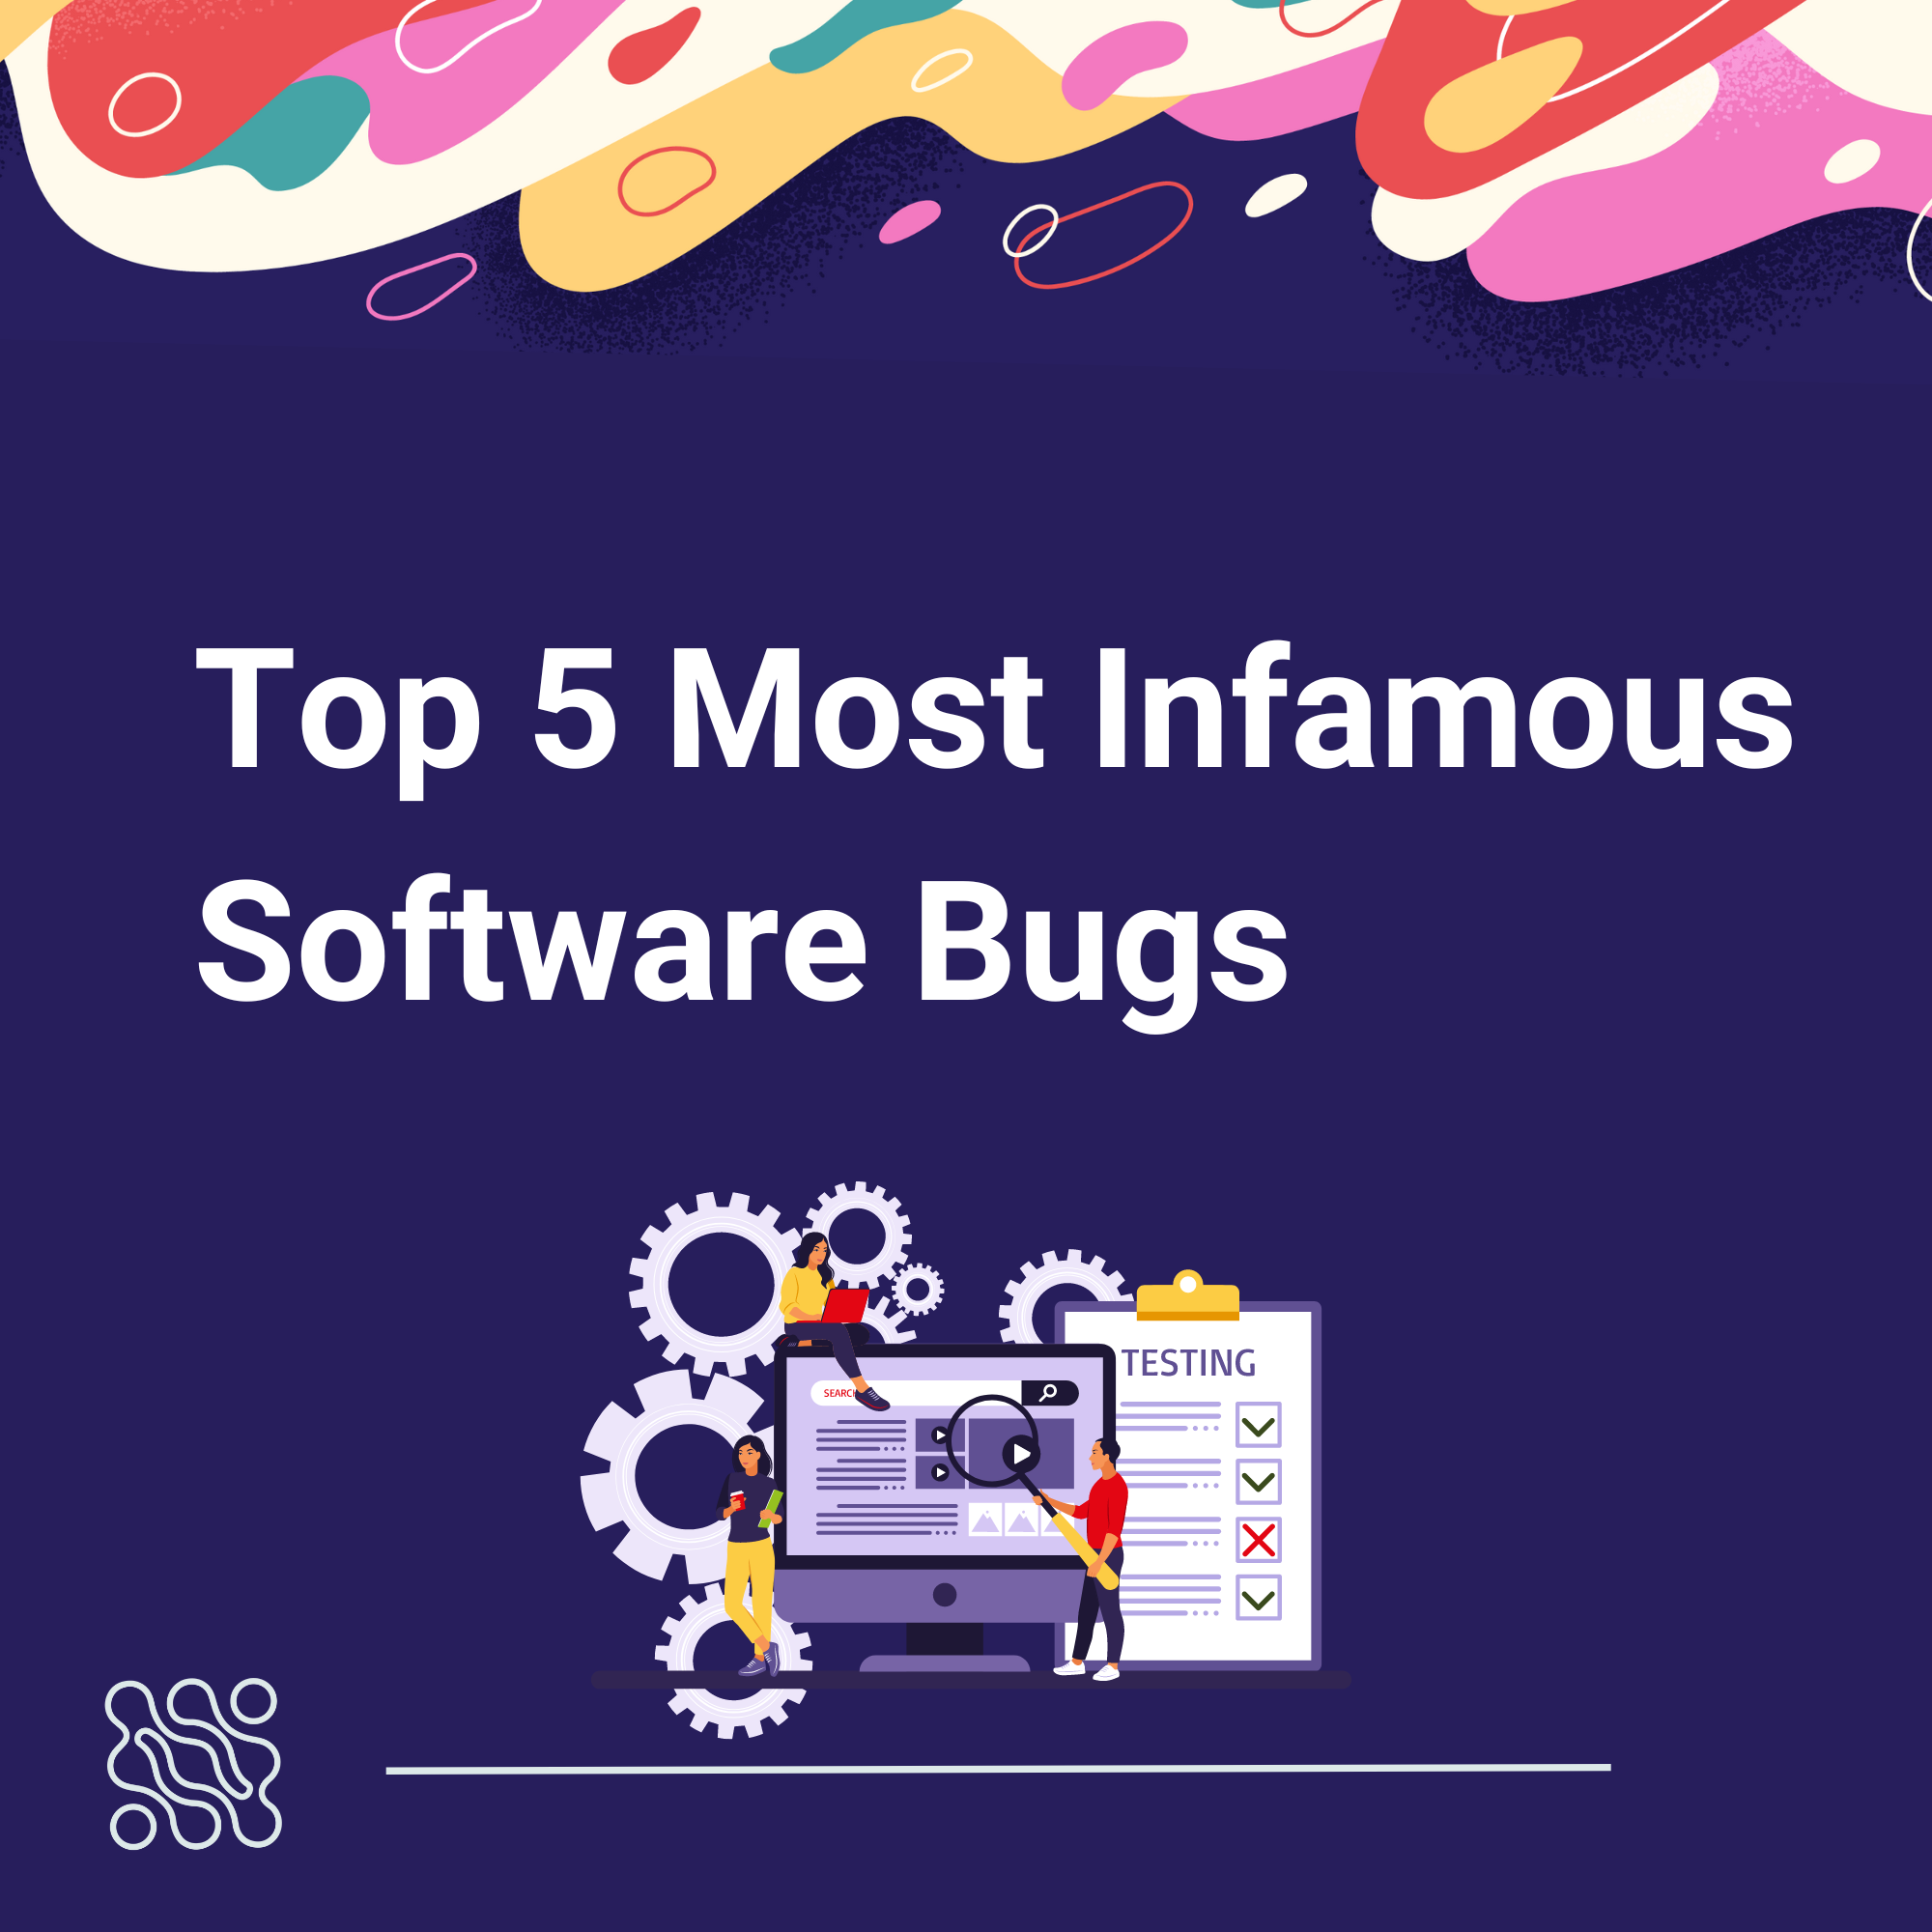 Top 5 Most Infamous Software Bugs In The World